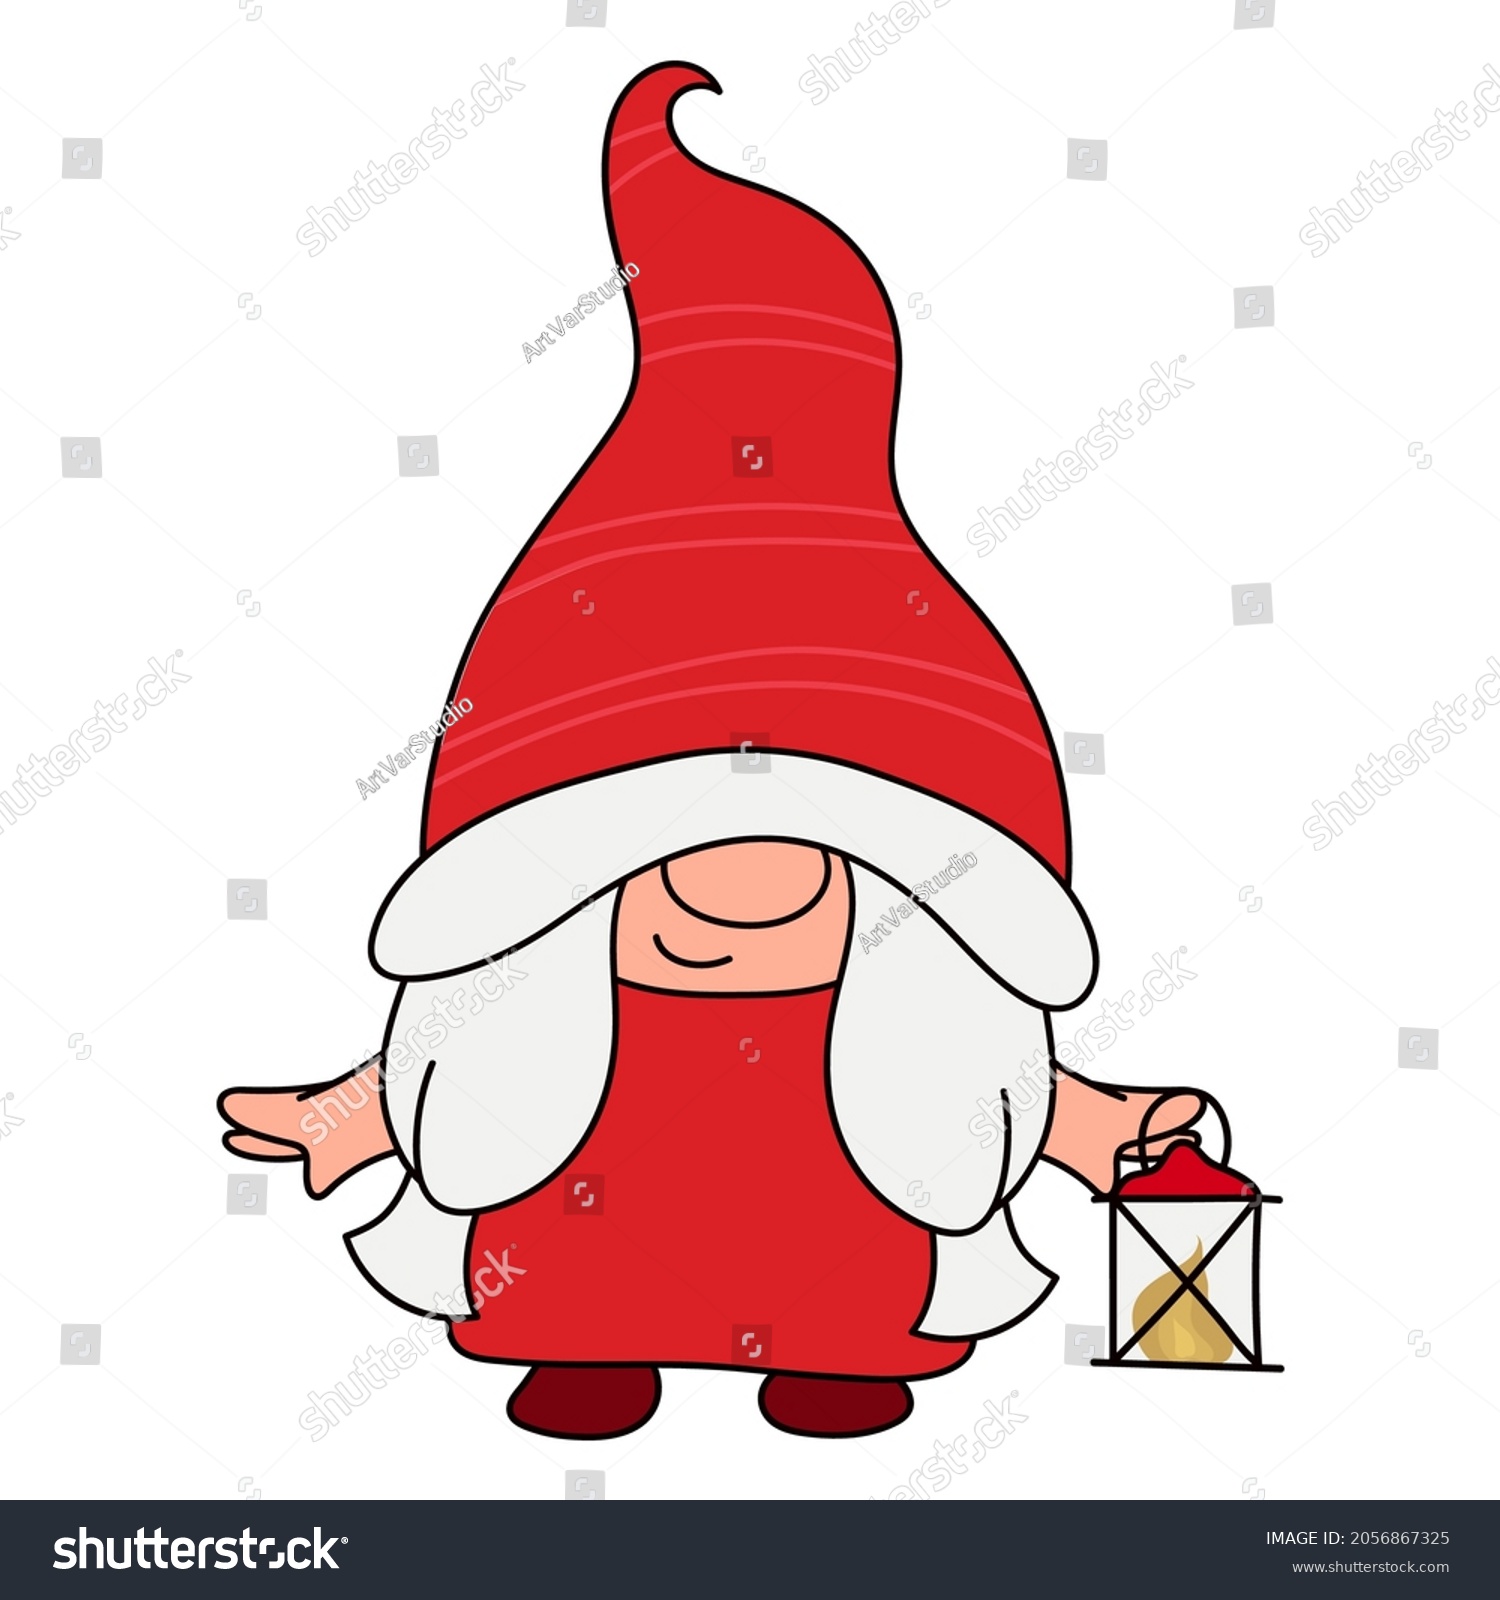 SVG of Cute Vector Christmas illustration. Christmas gnome clipart. Vector illustration of baby Xmas gnome for nursery room decor, posters, greeting cards and party invitations. Gnome illustration. svg